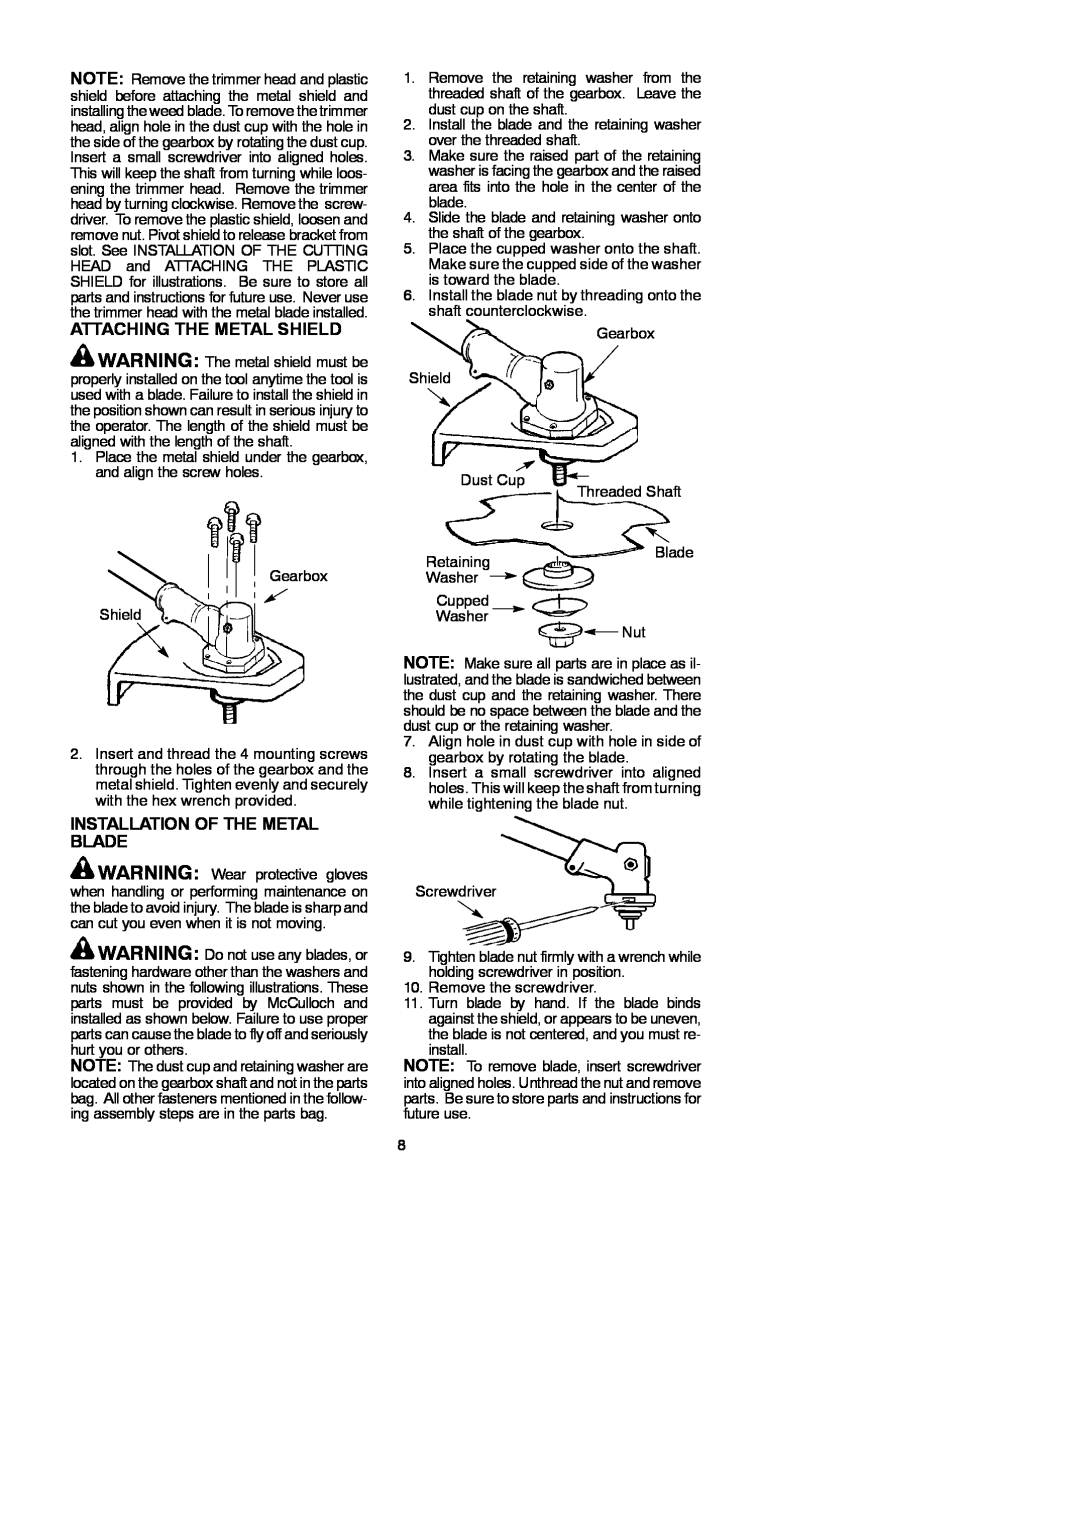 McCulloch 250 B instruction manual Attaching The Metal Shield, Installation Of The Metal Blade 